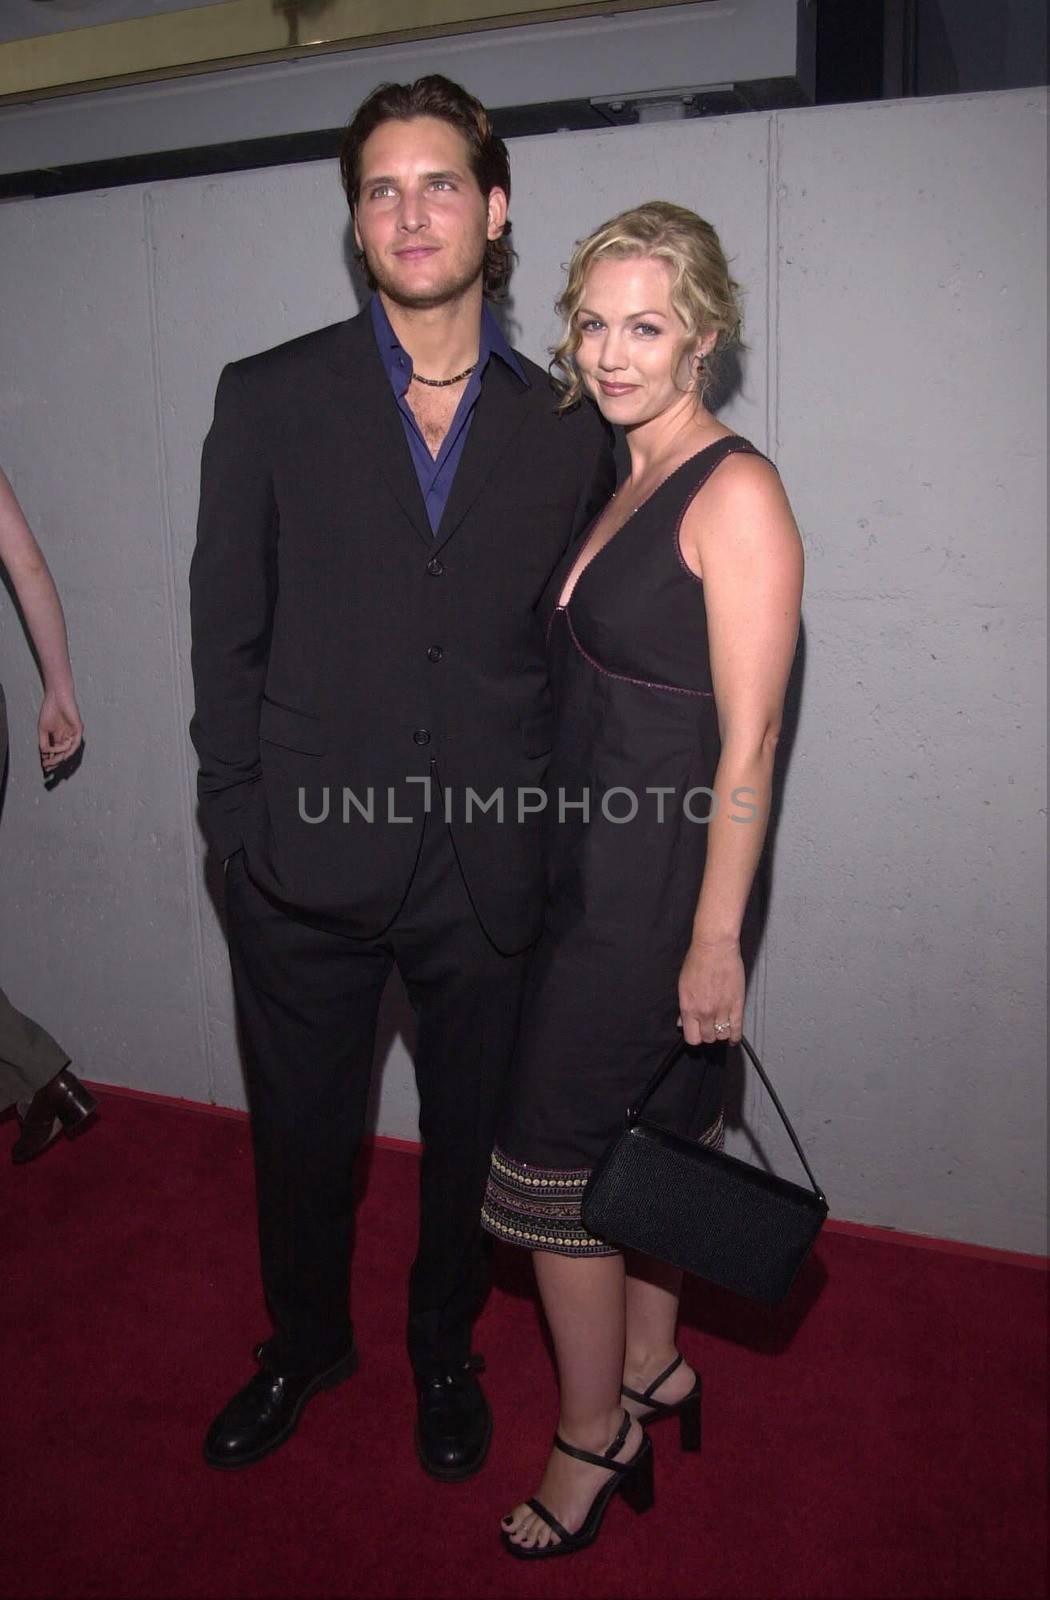 Peter Facinelli and Jennie Garth at the premiere of Lions Gate Film's "THE BIG KAHUNA" in Hollywood, 04-26-00